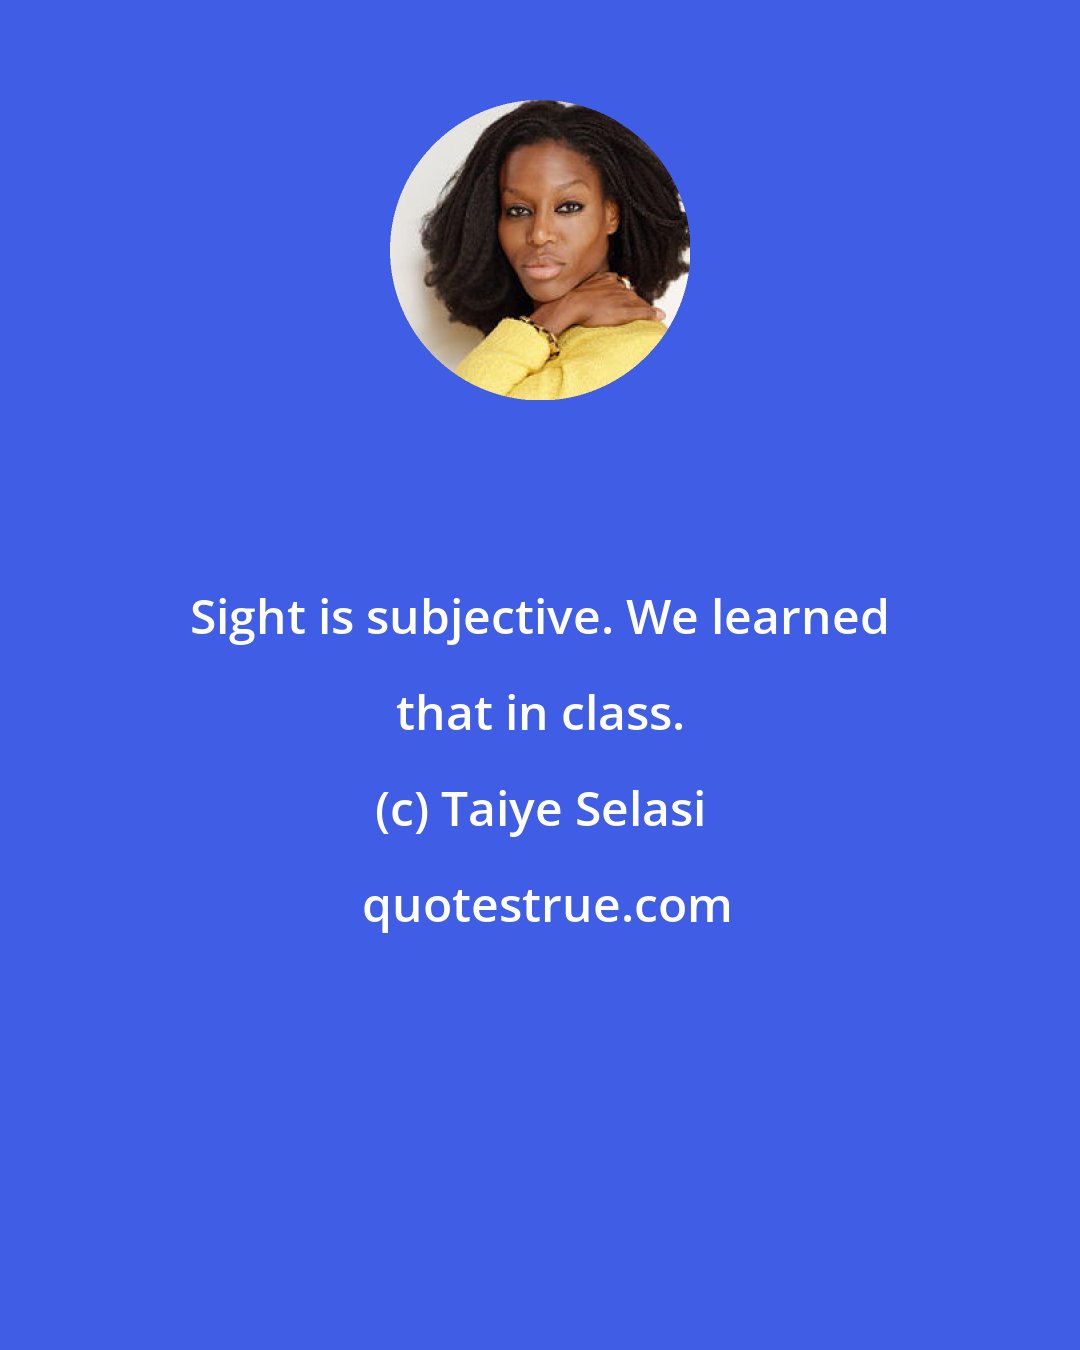 Taiye Selasi: Sight is subjective. We learned that in class.